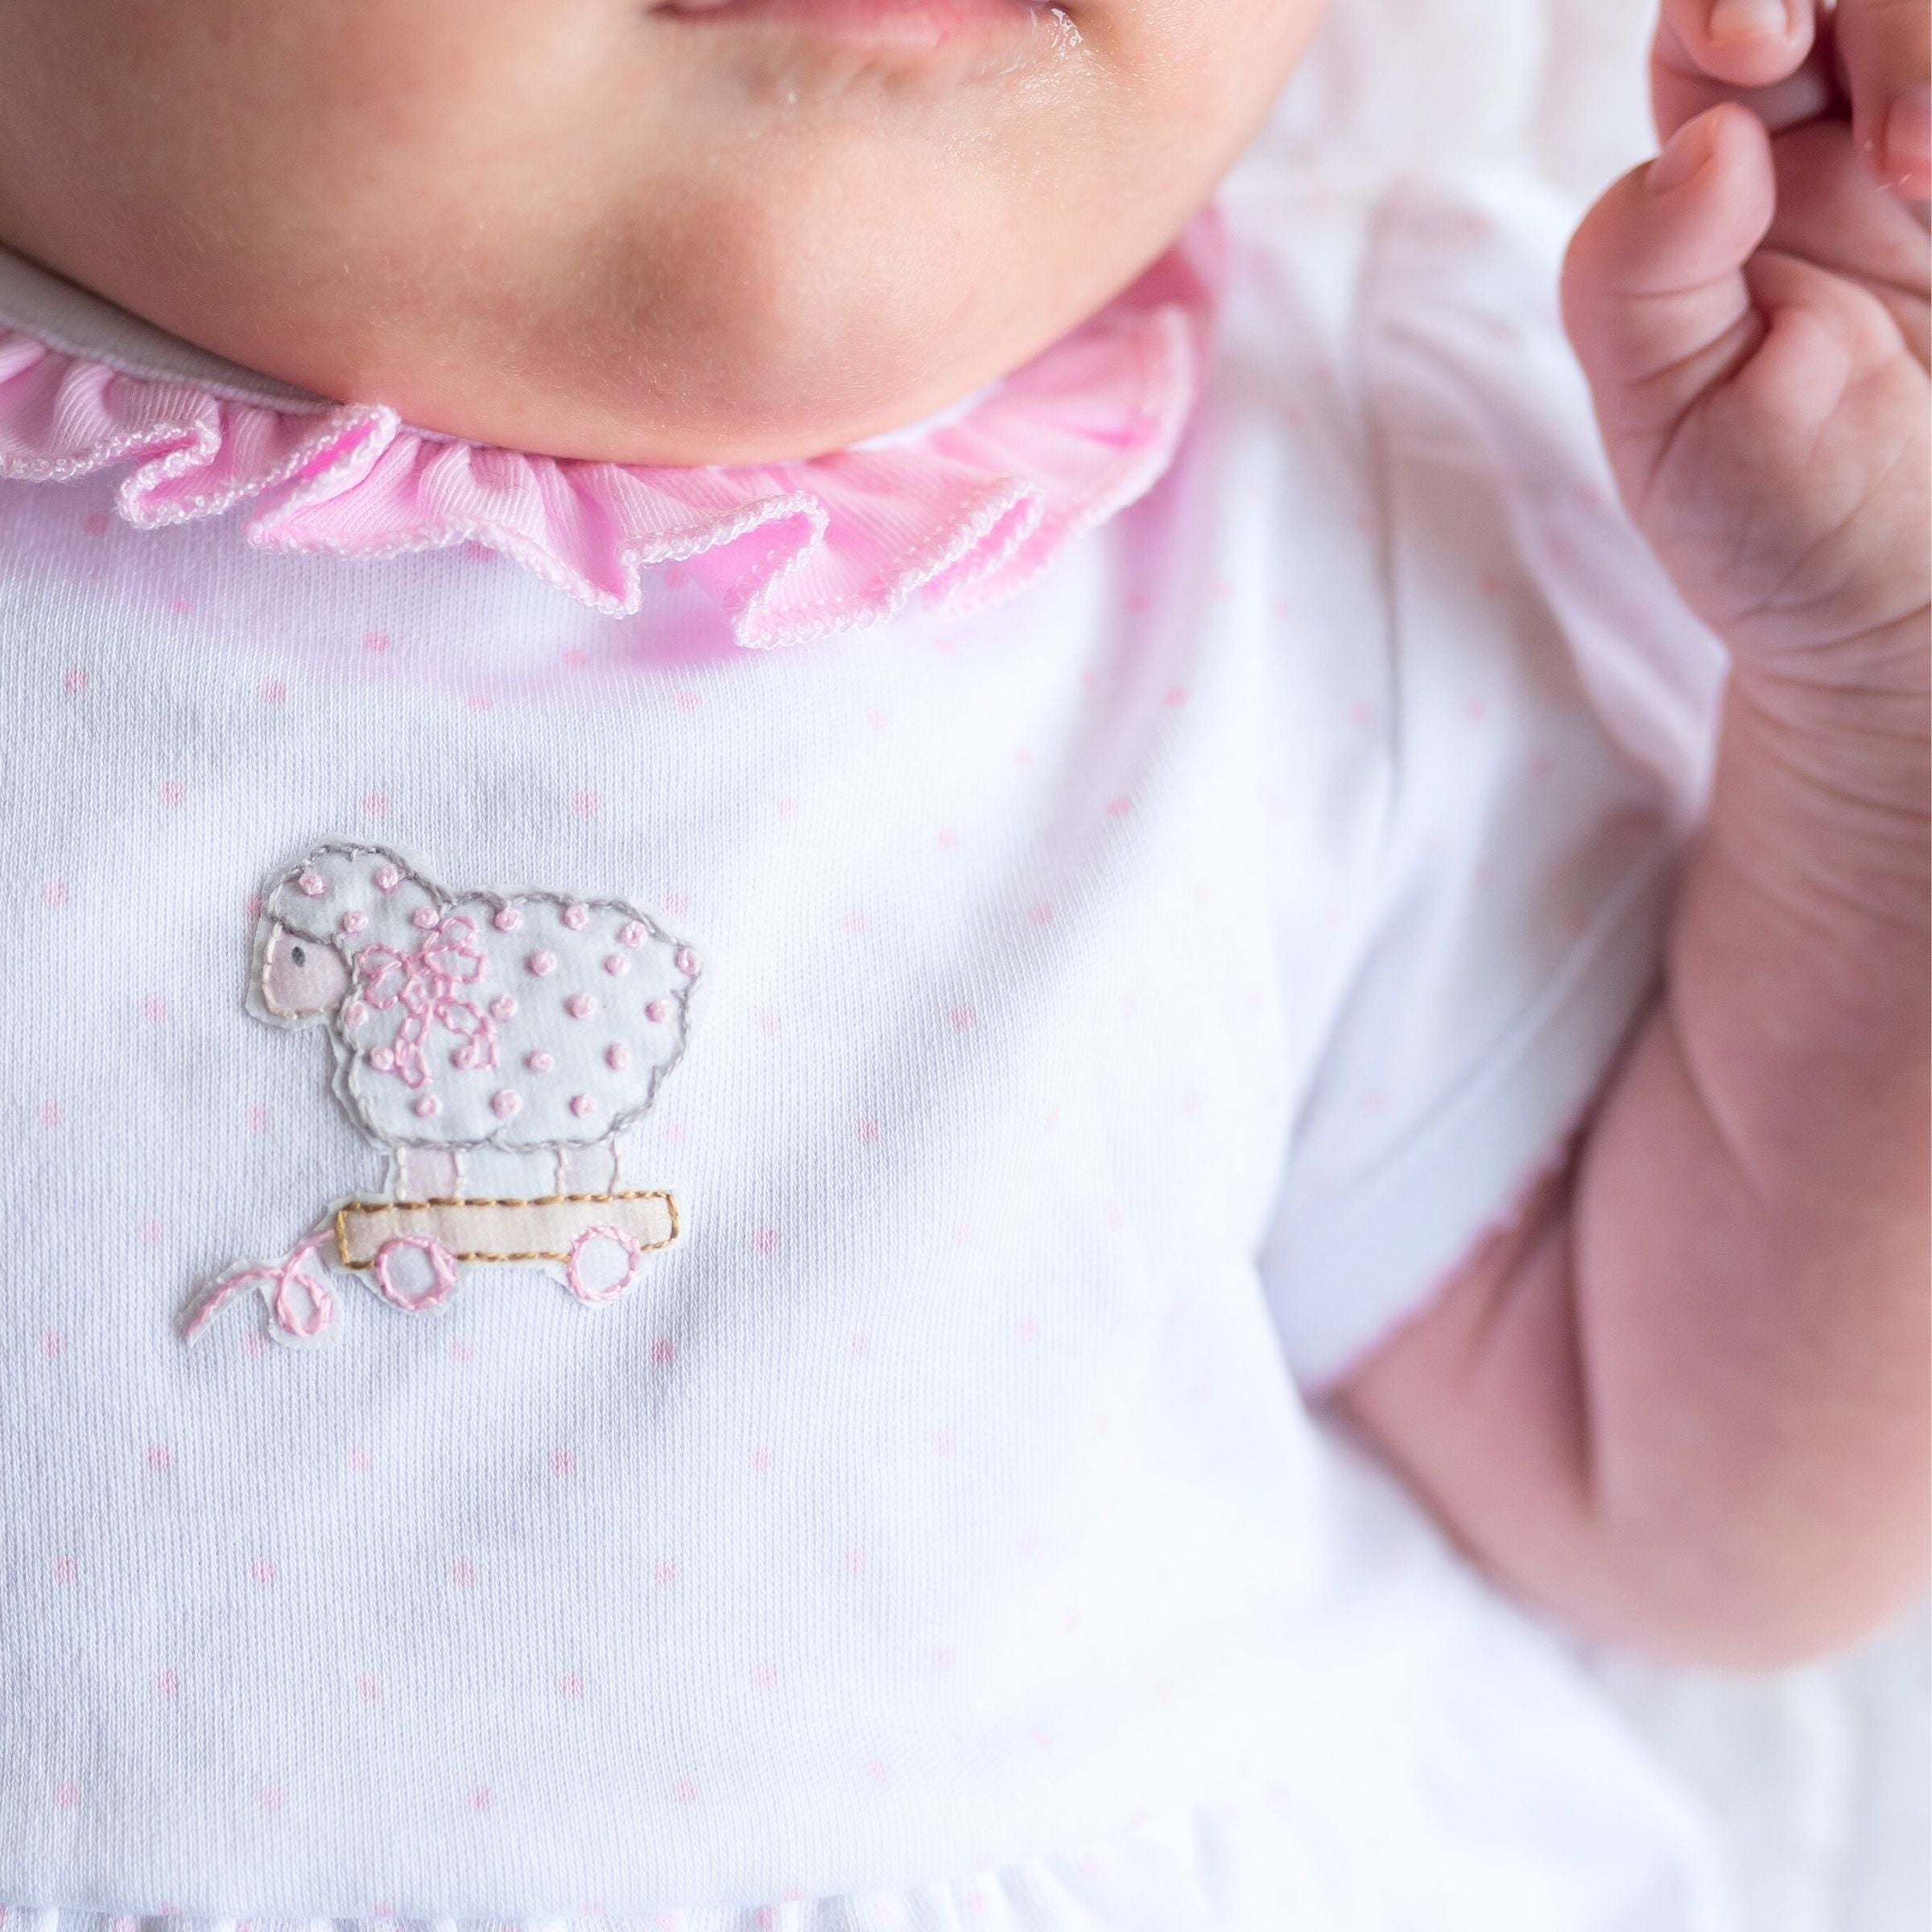 Darling Lambs Embroidered Girl Bubble